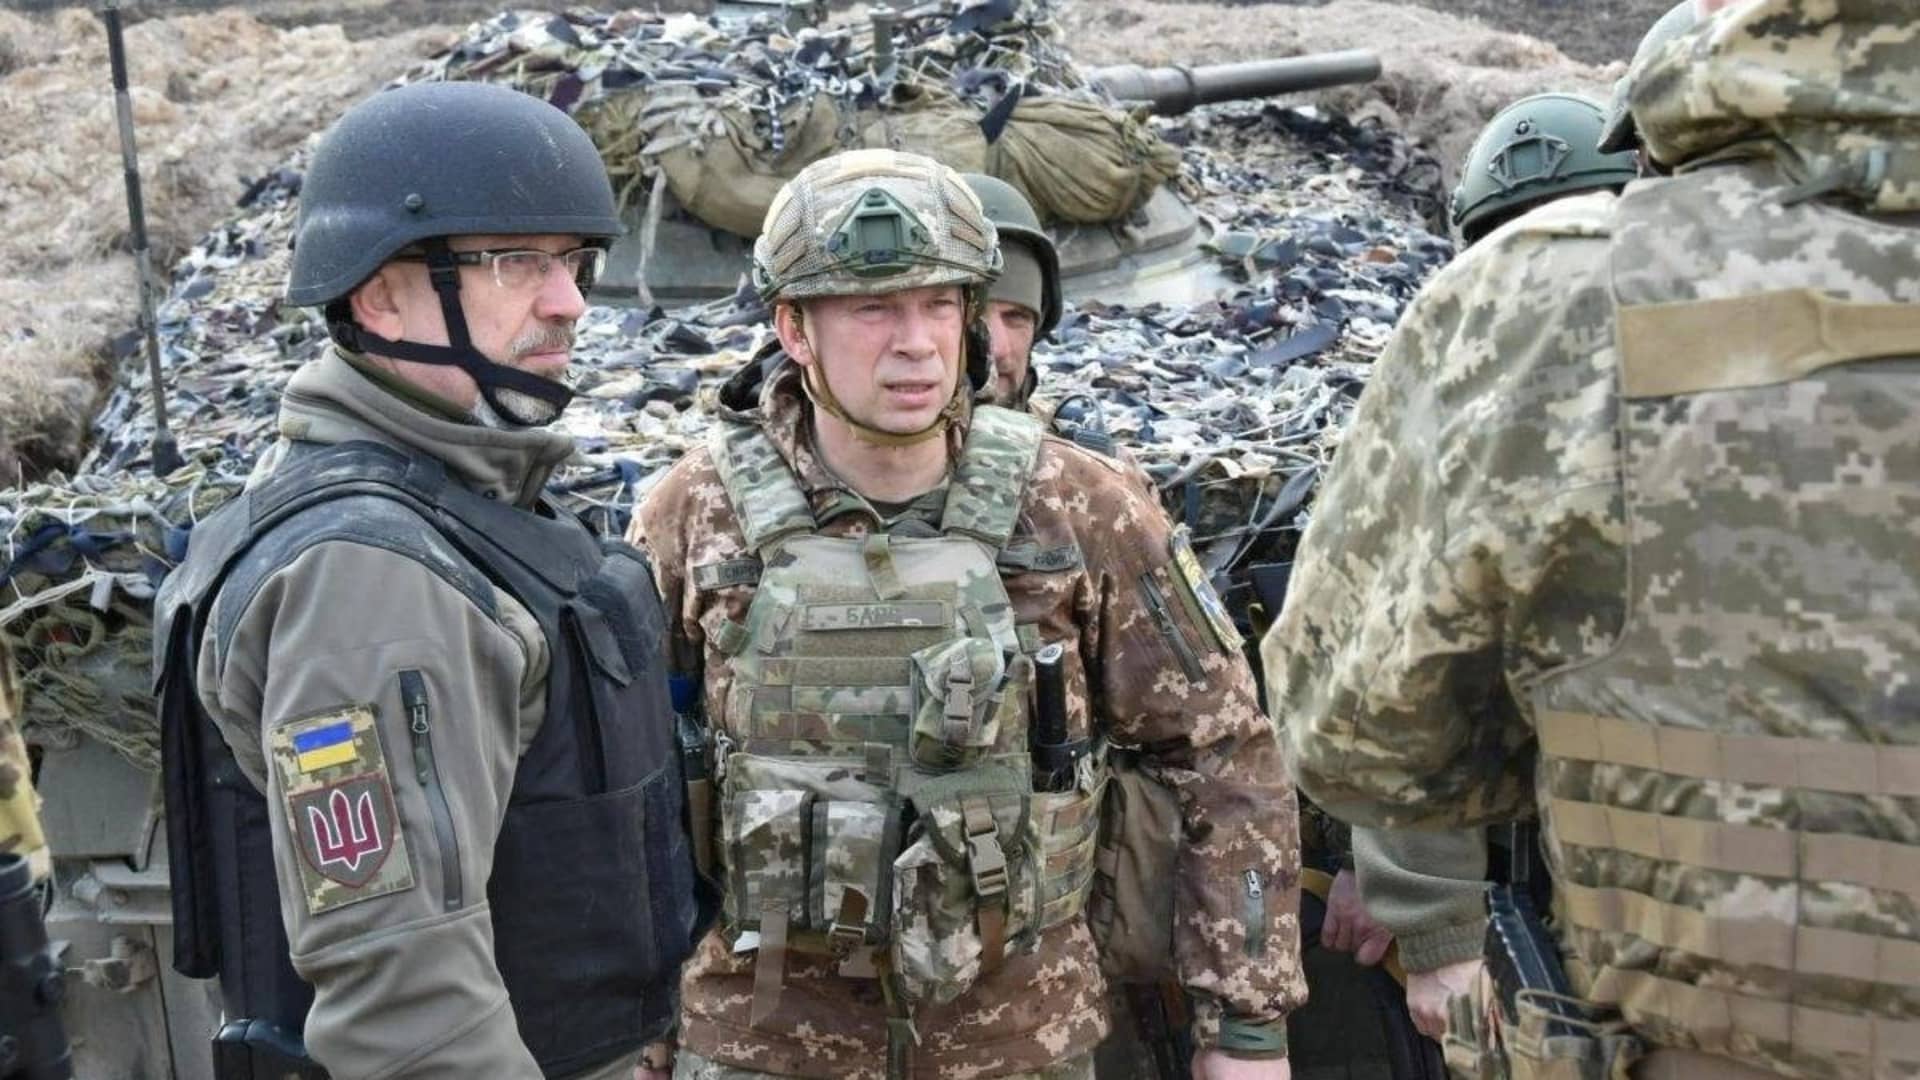 Ukraine's Defence Minister Oleksii Reznikov visits positions of Ukrainian service members, as Russia's attack on Ukraine continues, outside of Kyiv, Ukraine March 25, 2022.